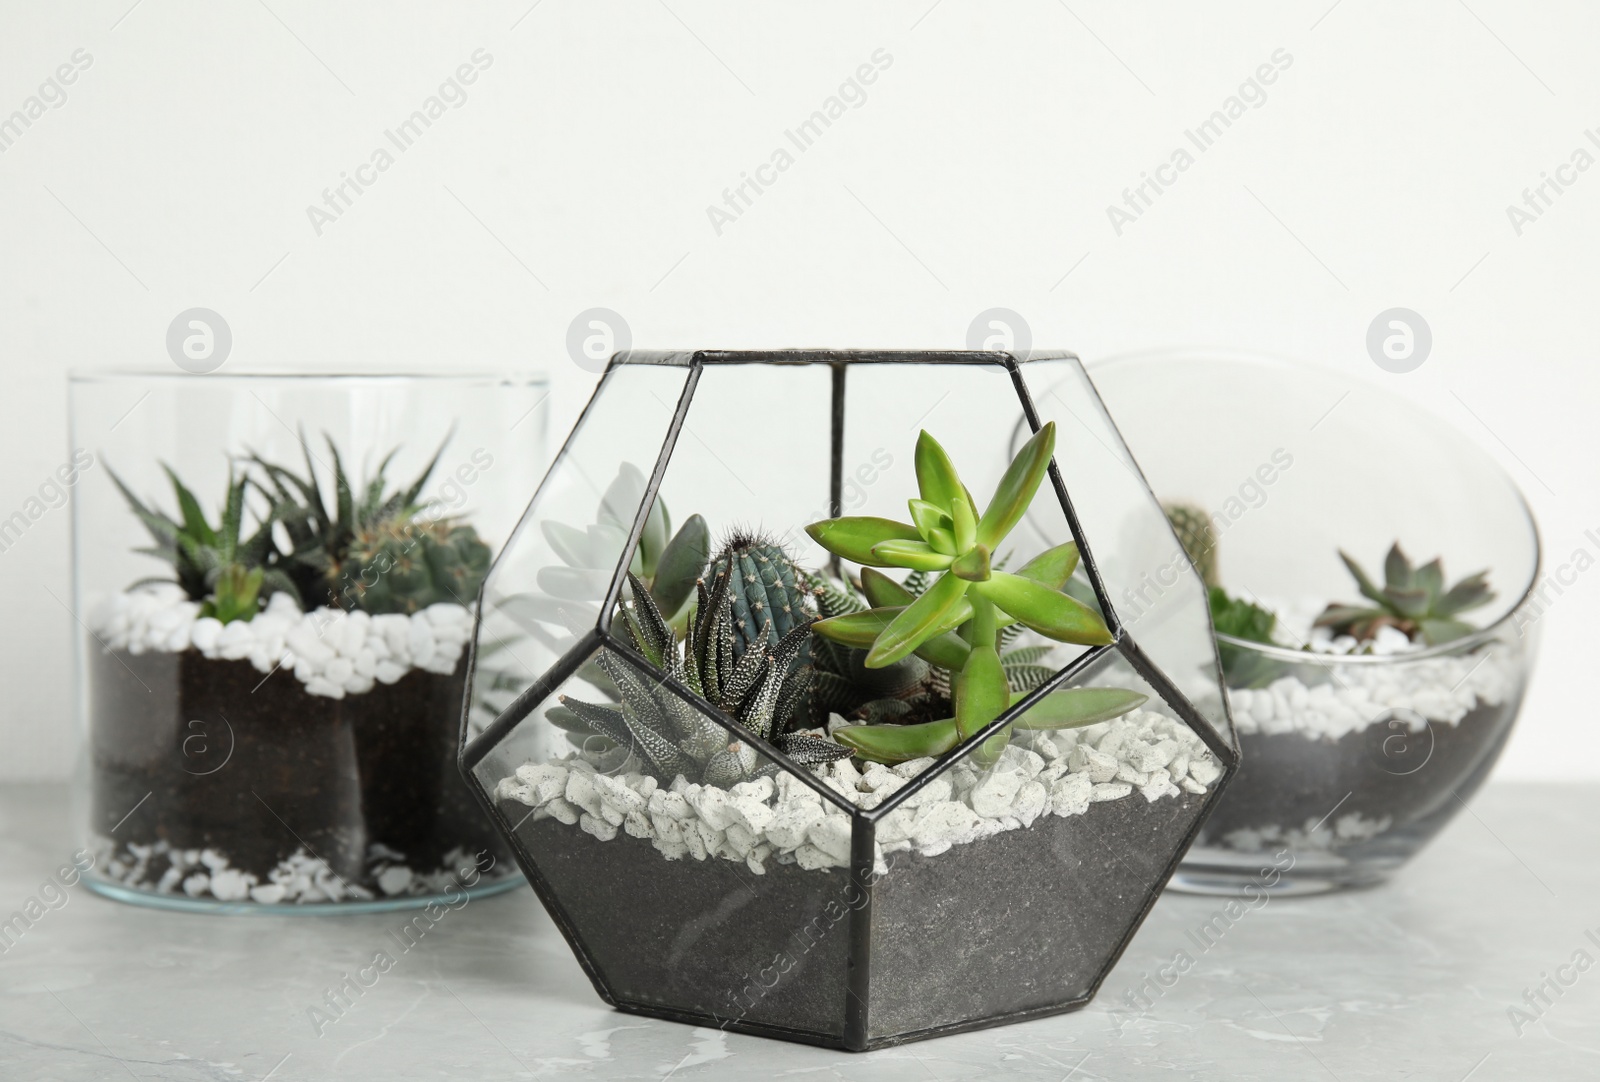 Photo of Glass florariums with different succulents on table against white background